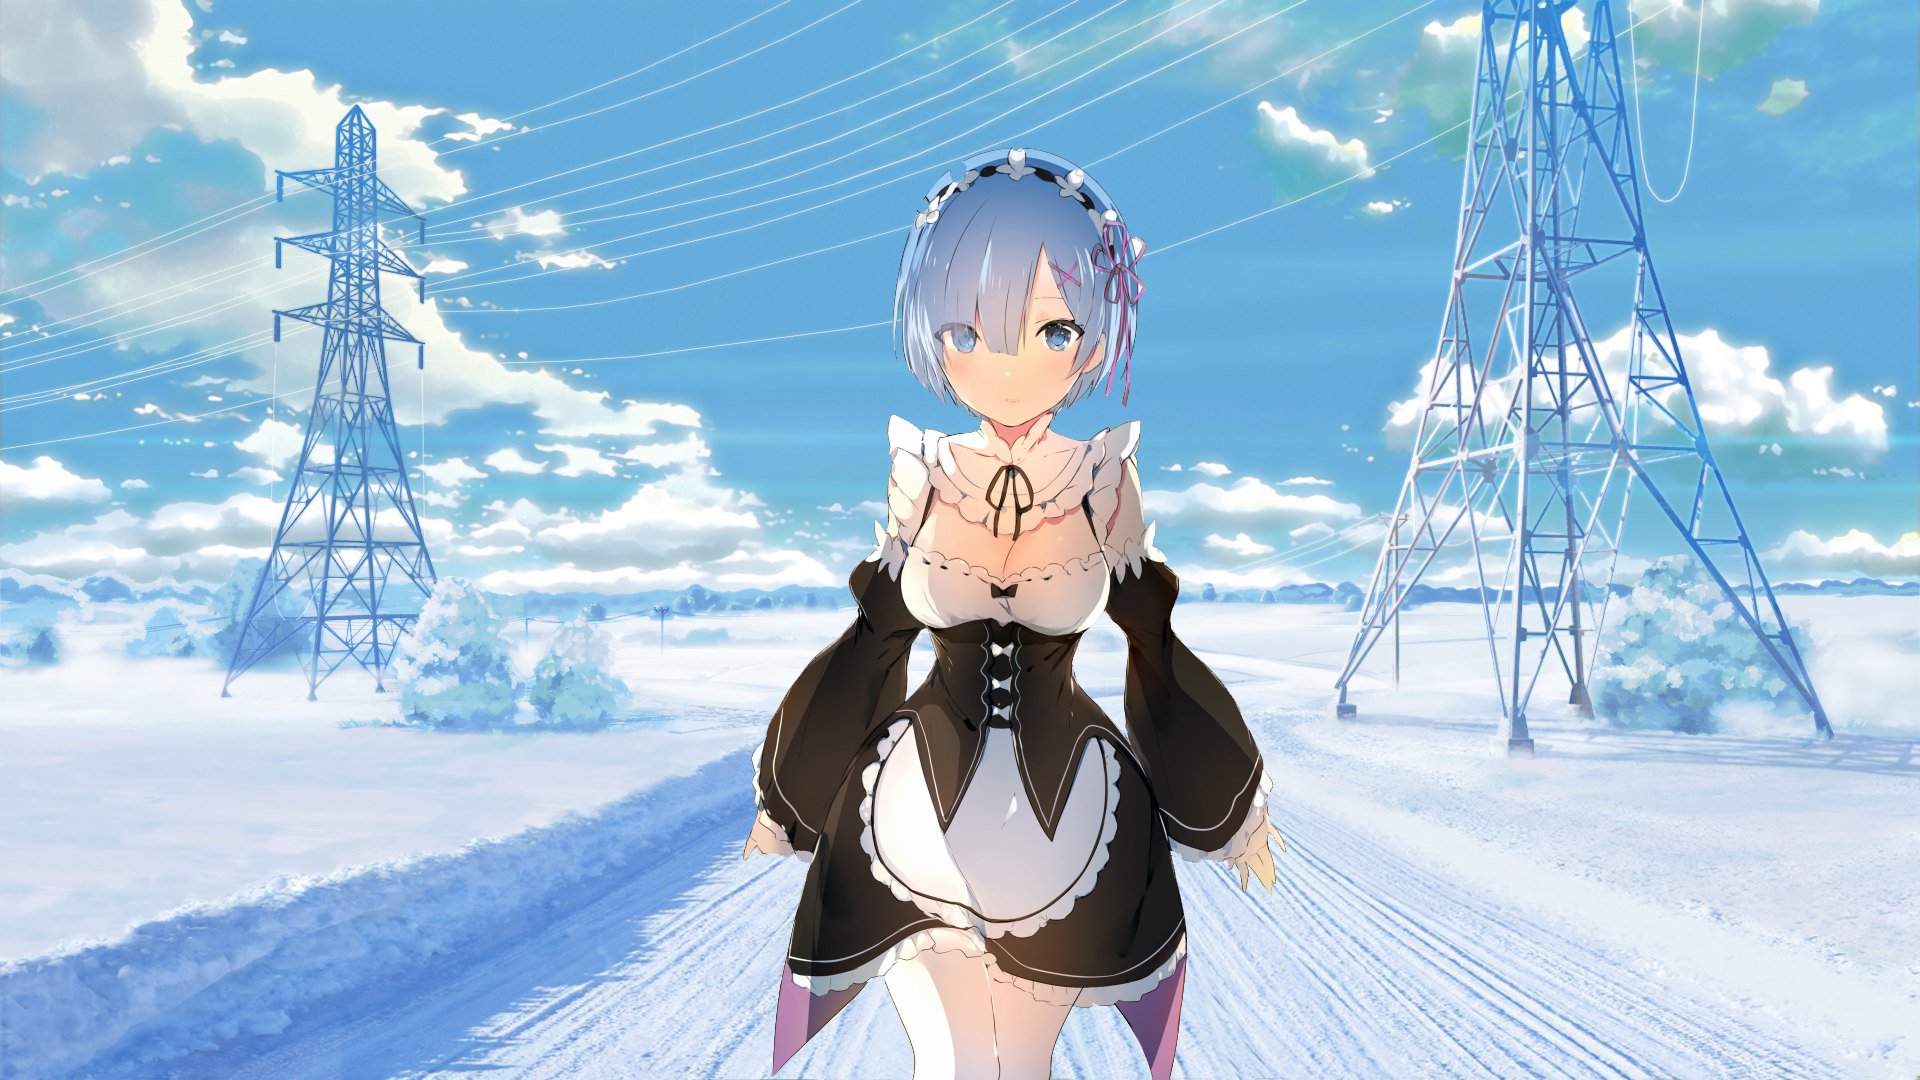 1920x1080 Re:ZERO -Starting Life In Another World- Wallpaper Background Ima...